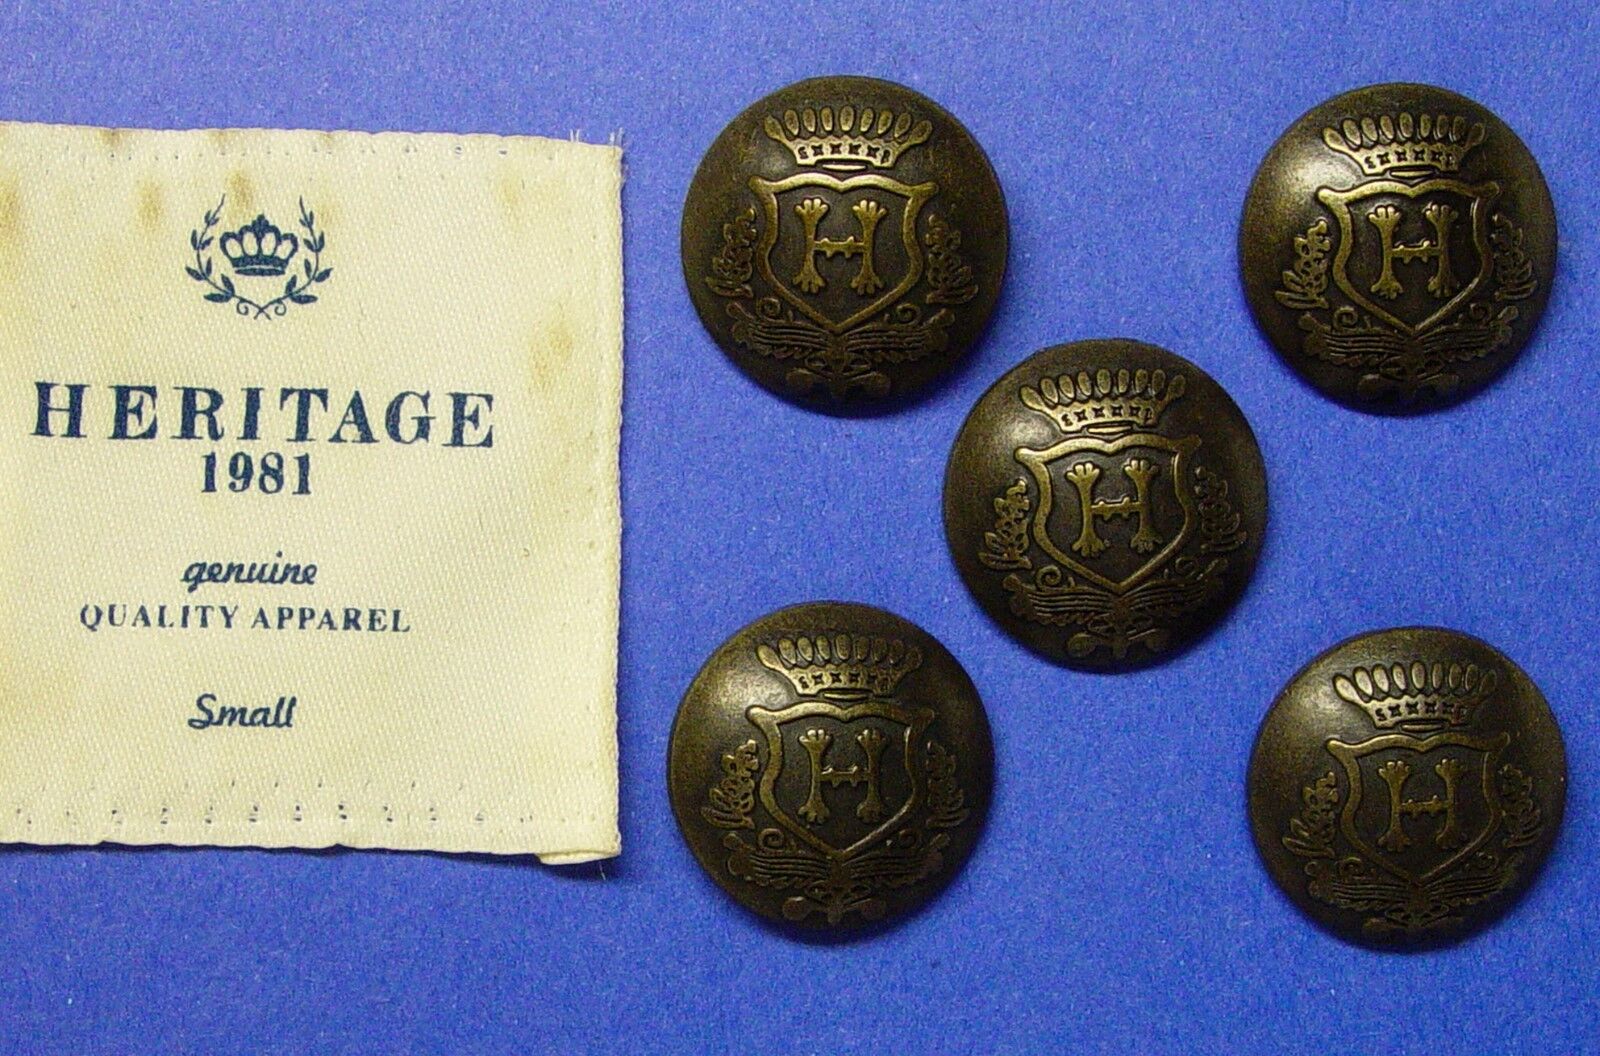 5 HERITAGE dark bronze 7/8 inch metal buttons, dome shaped,very antigue looking 